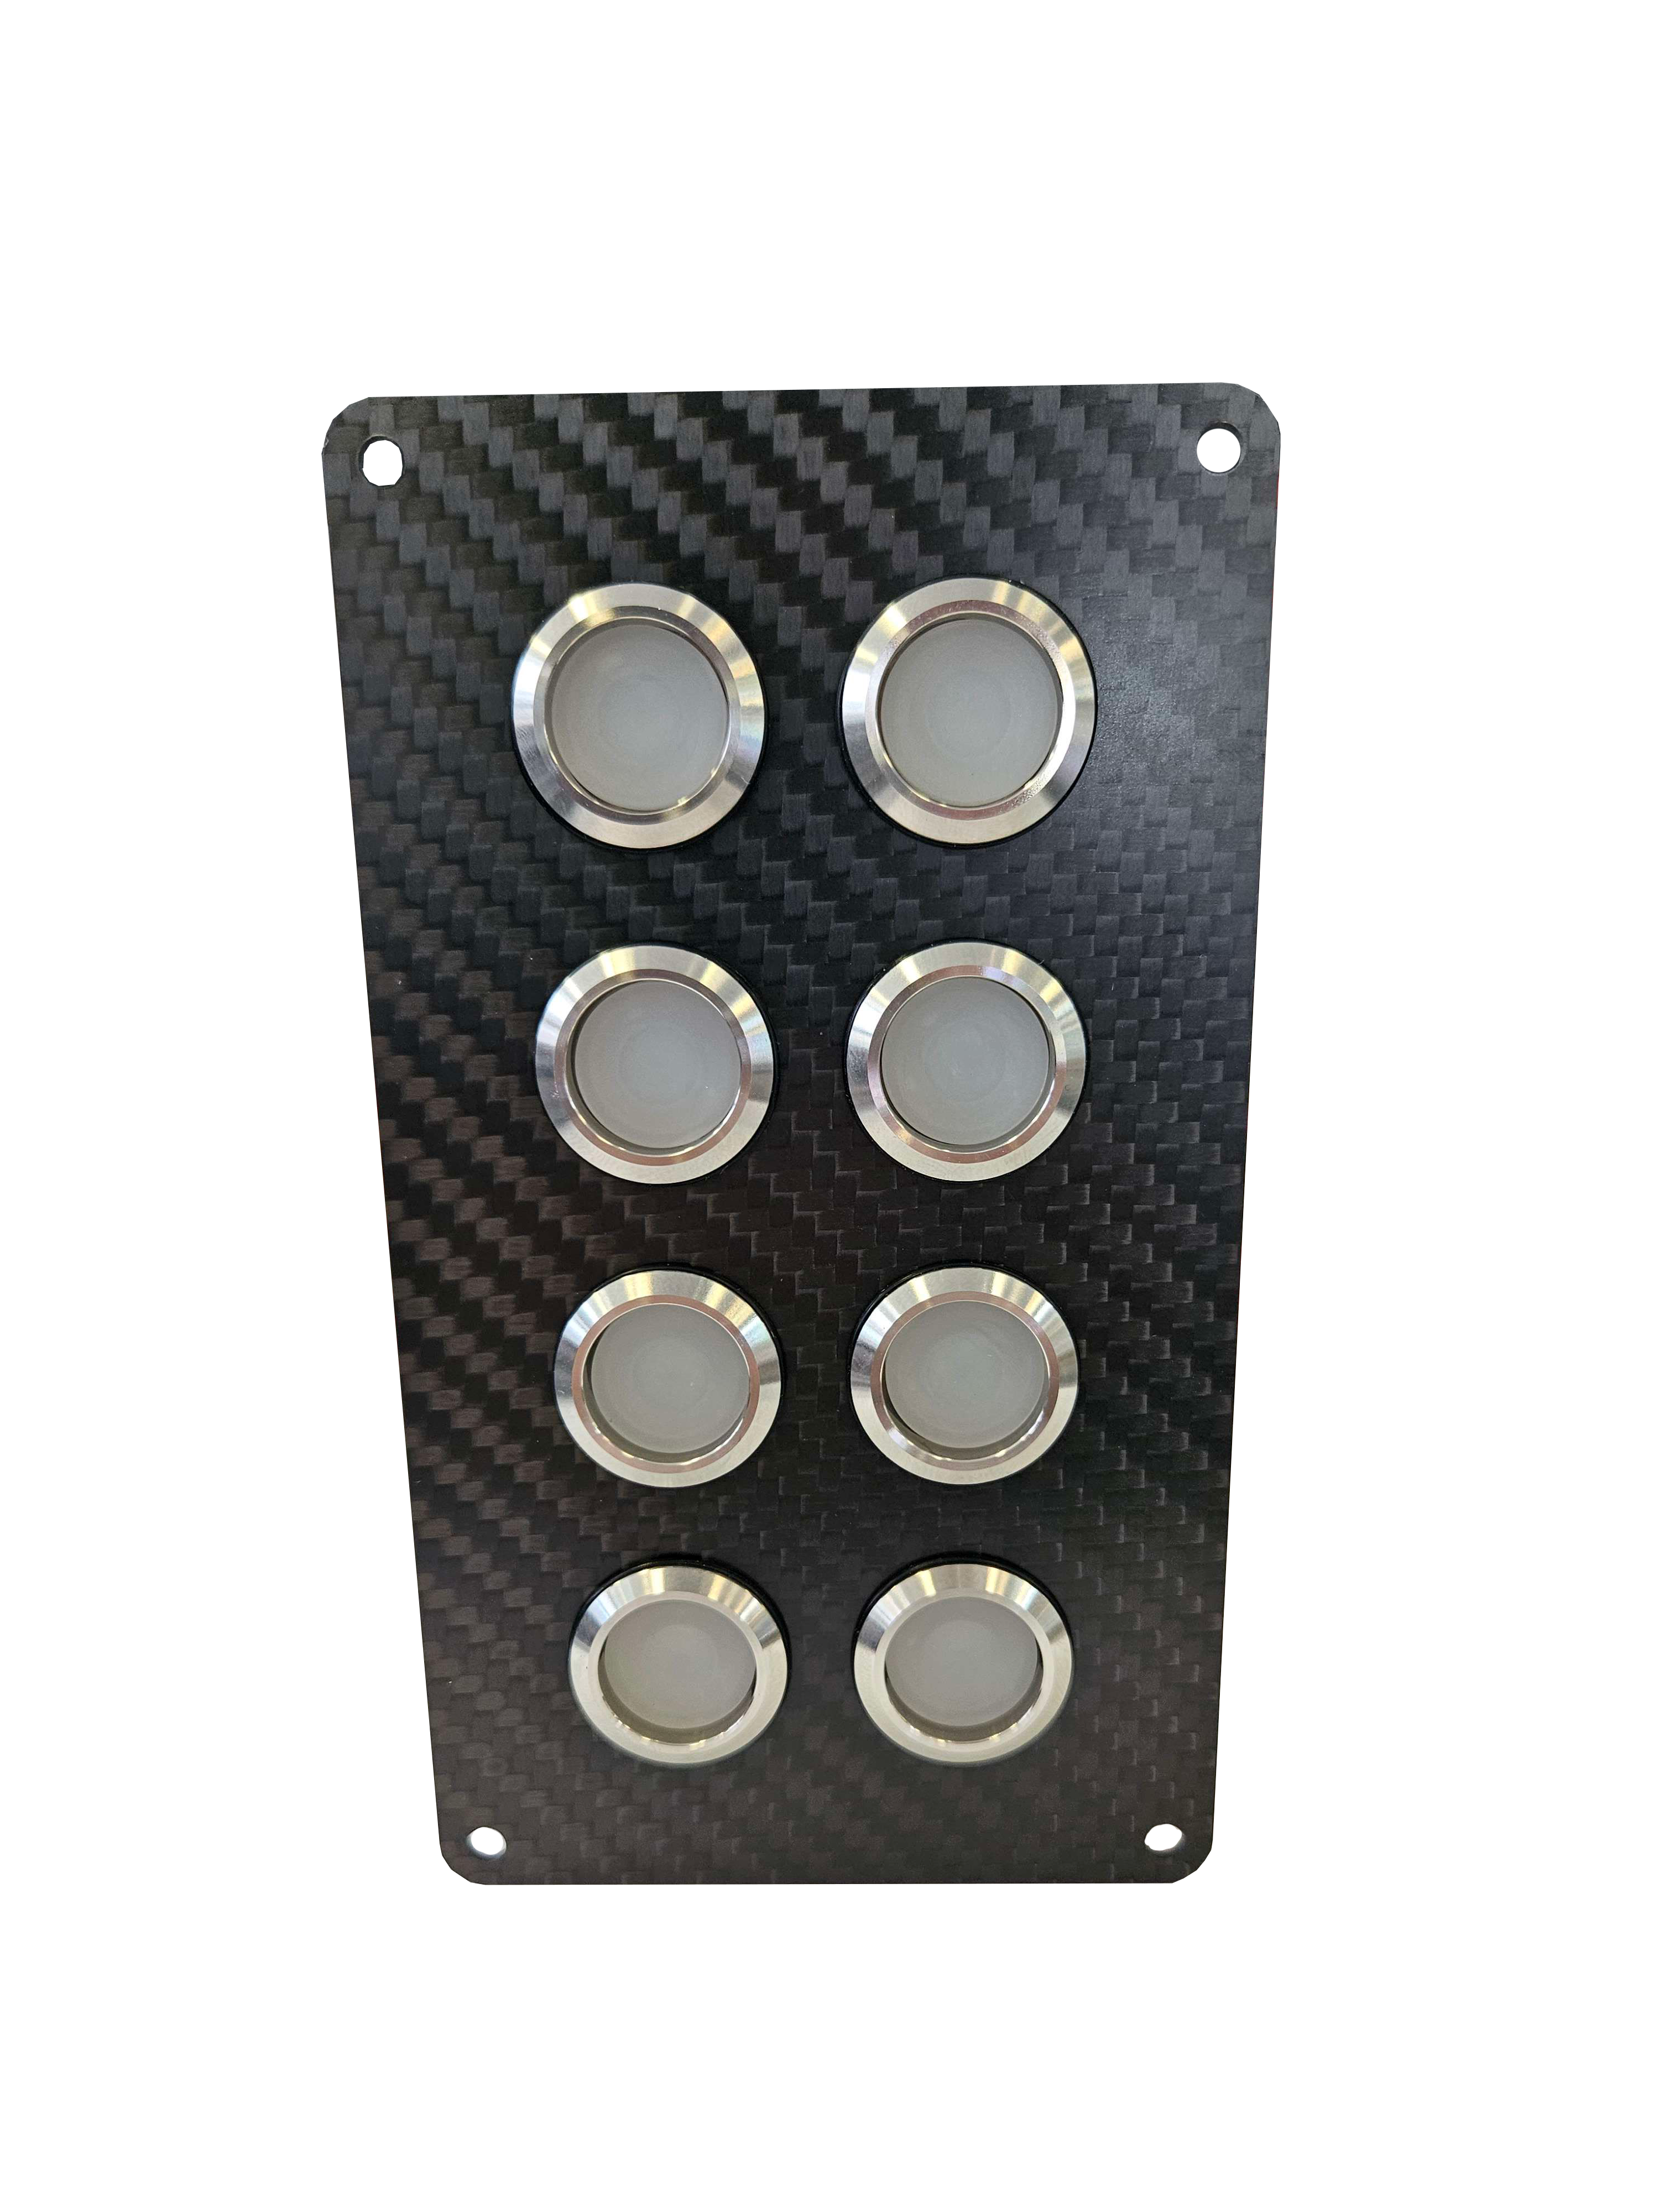 8 gang carbon fibre switch panel with 20A backlit switches